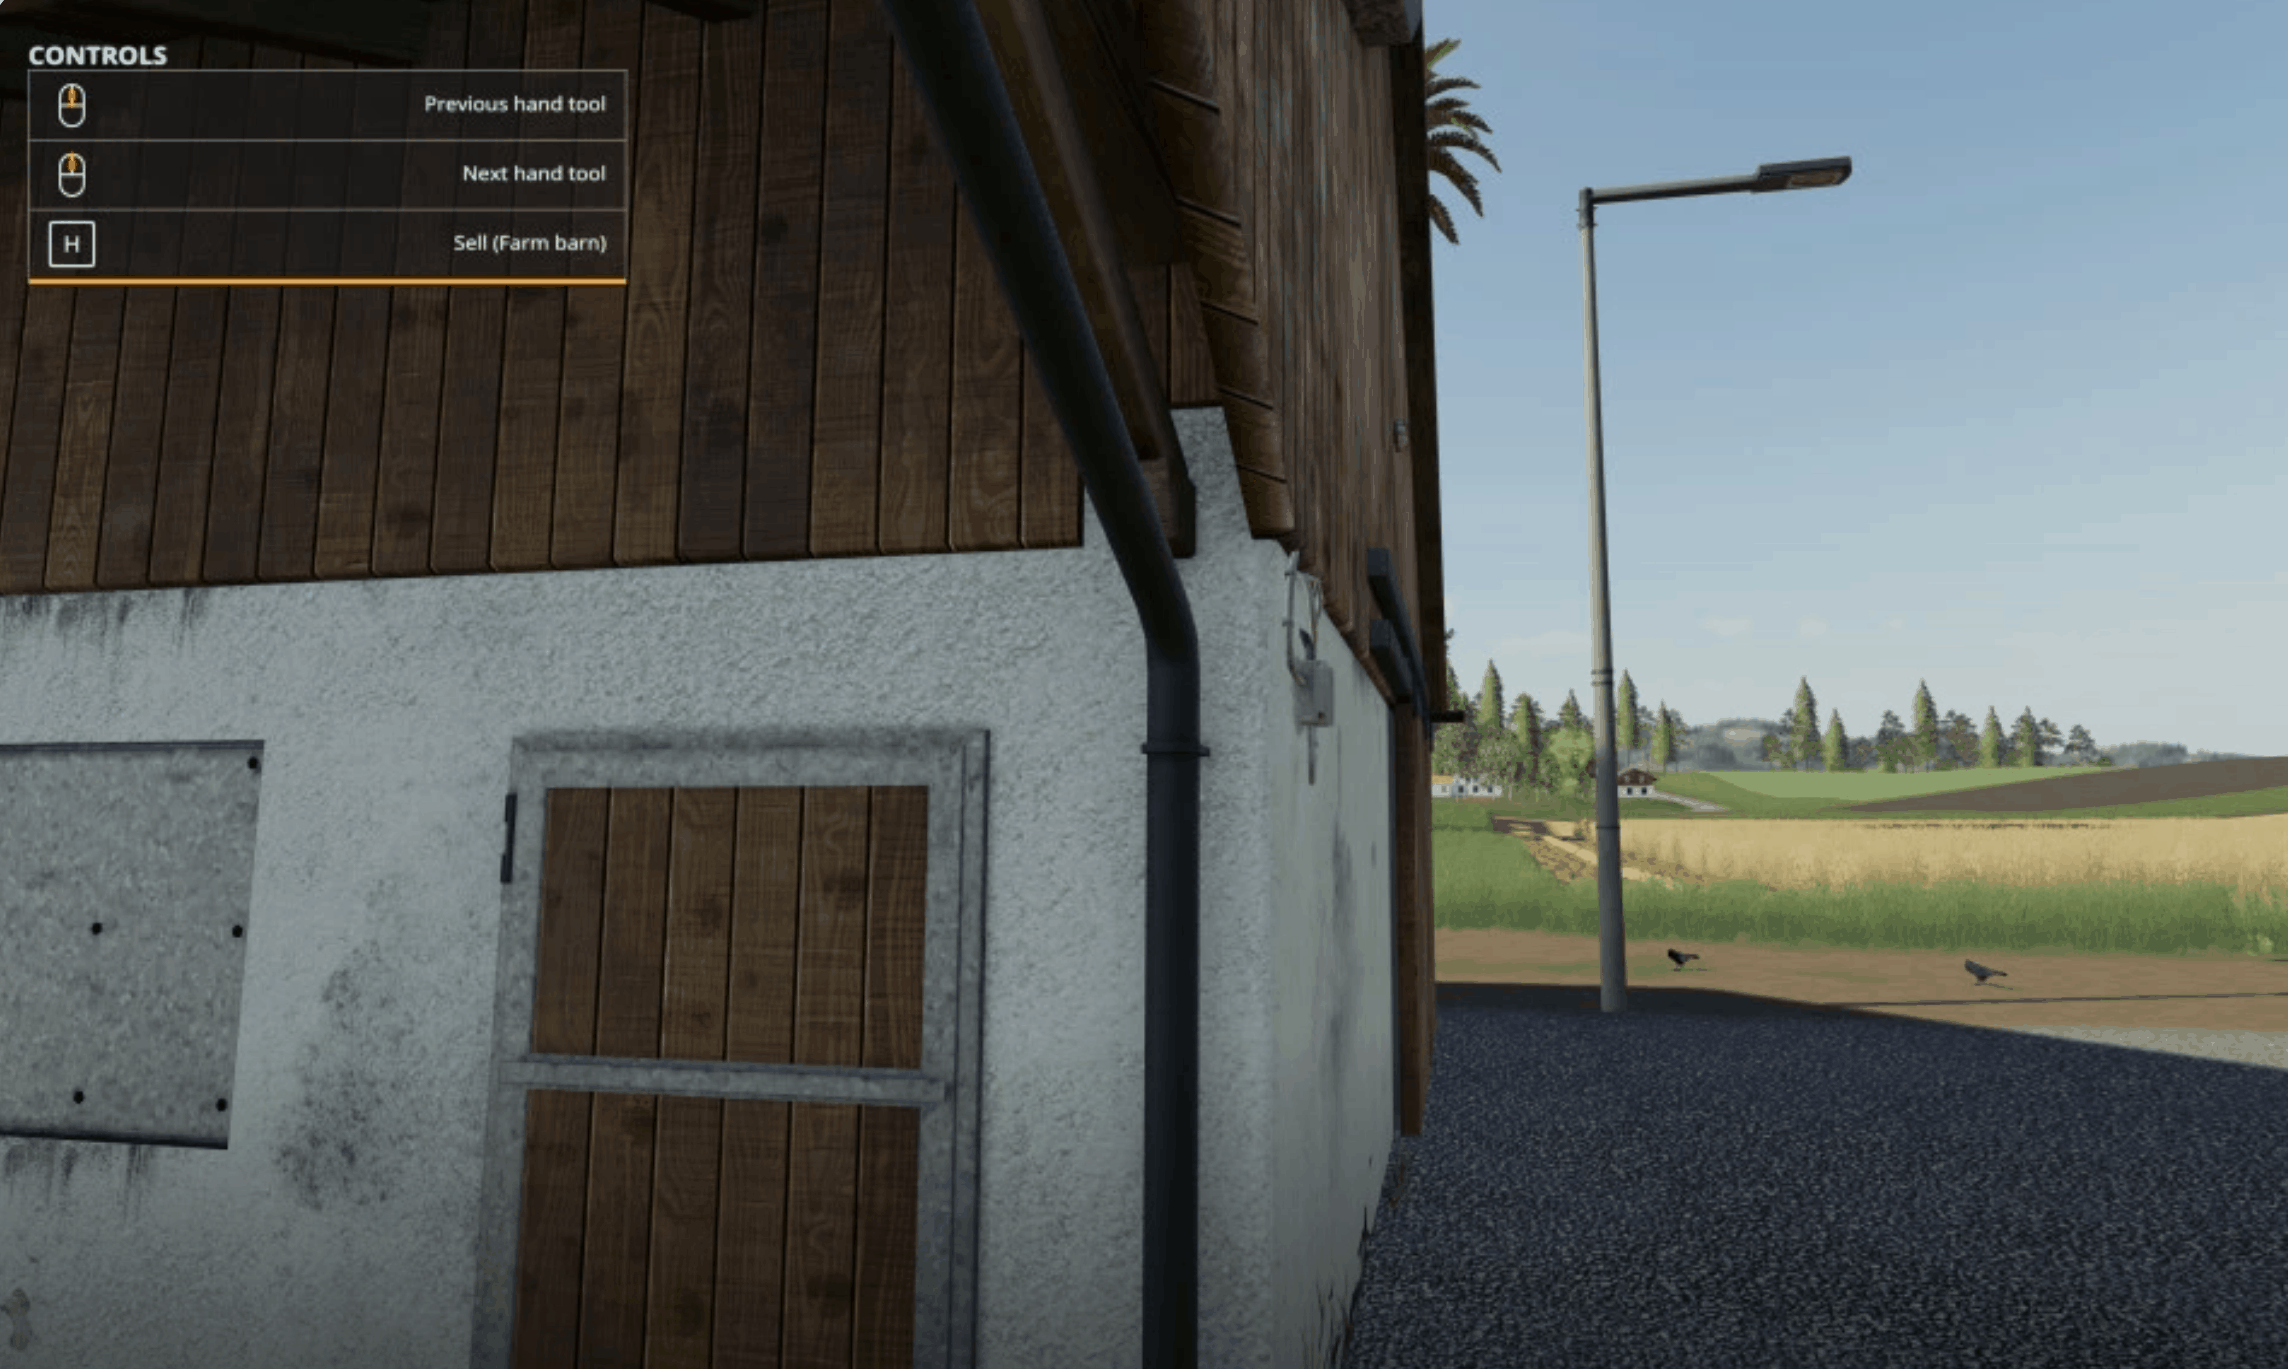 FS19 Map Objects Hider V1.2.0 3 